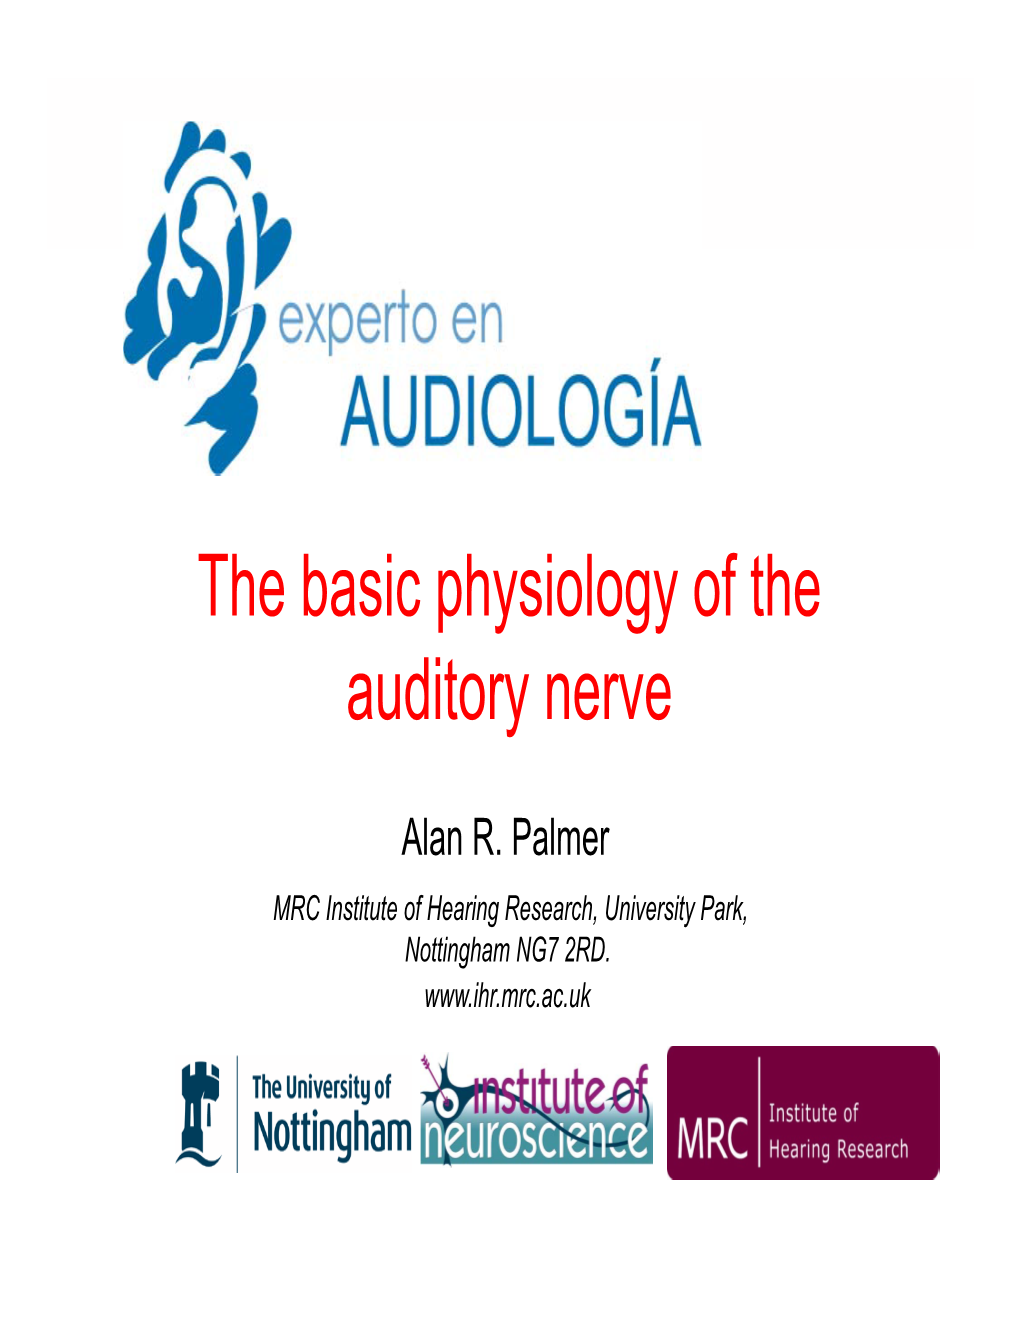 The Basic Physiology of the Auditory Nerve